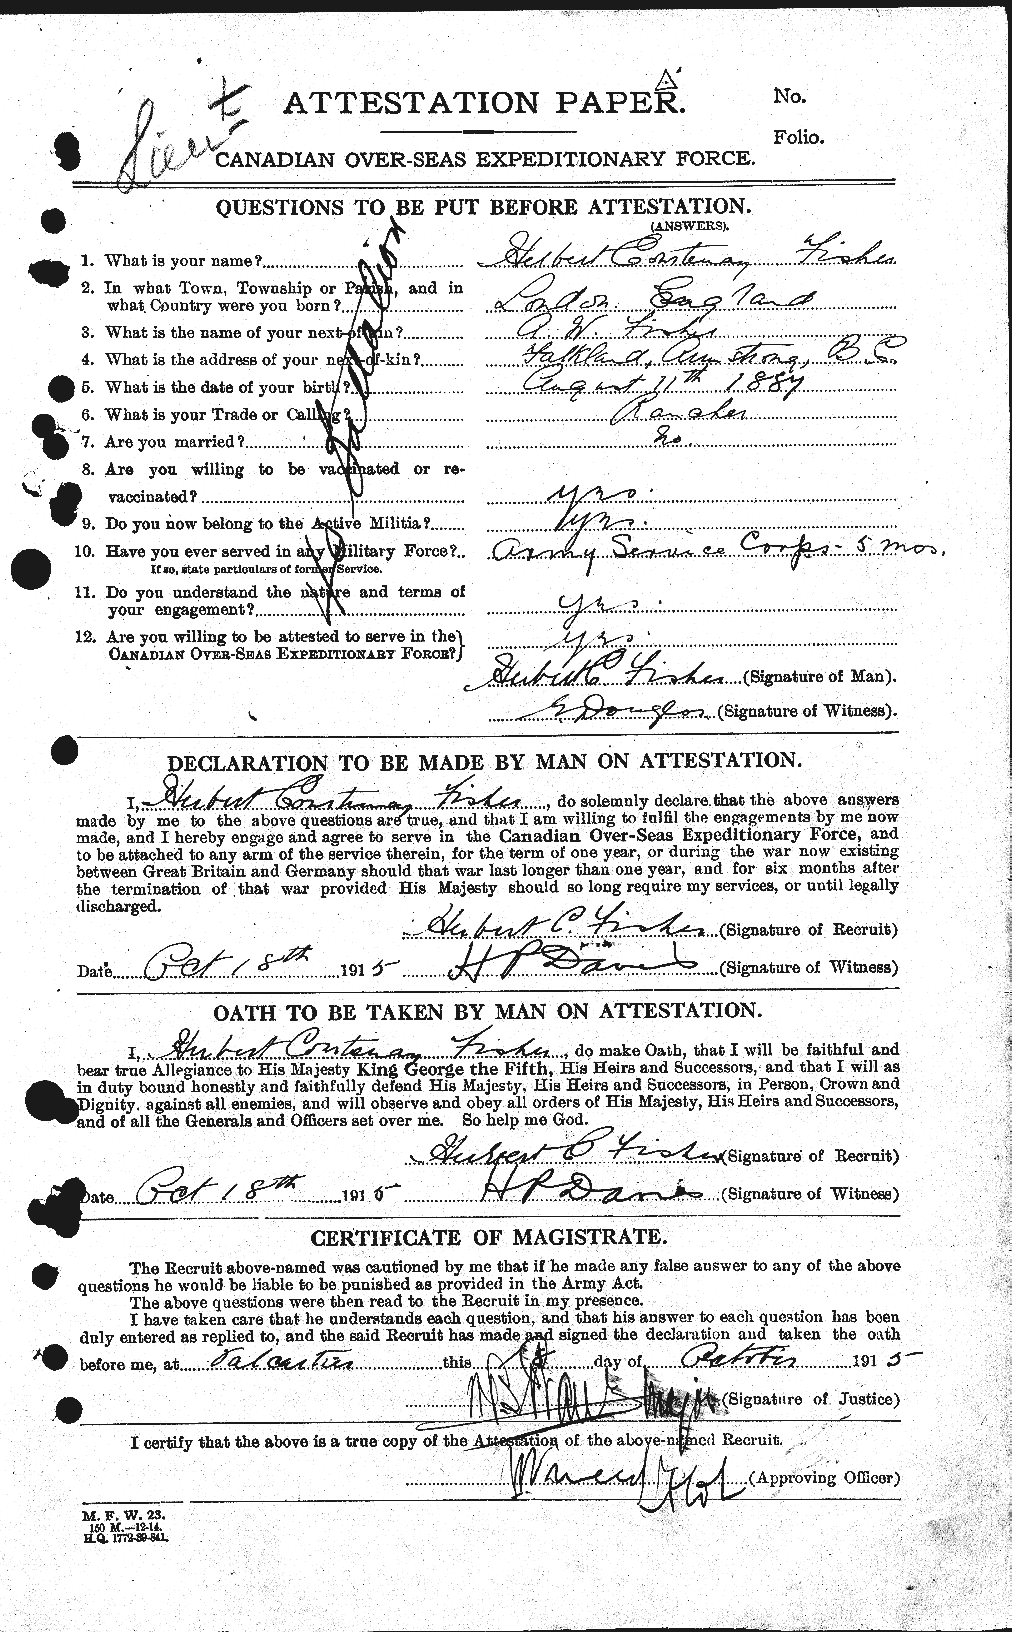 Personnel Records of the First World War - CEF 325994a